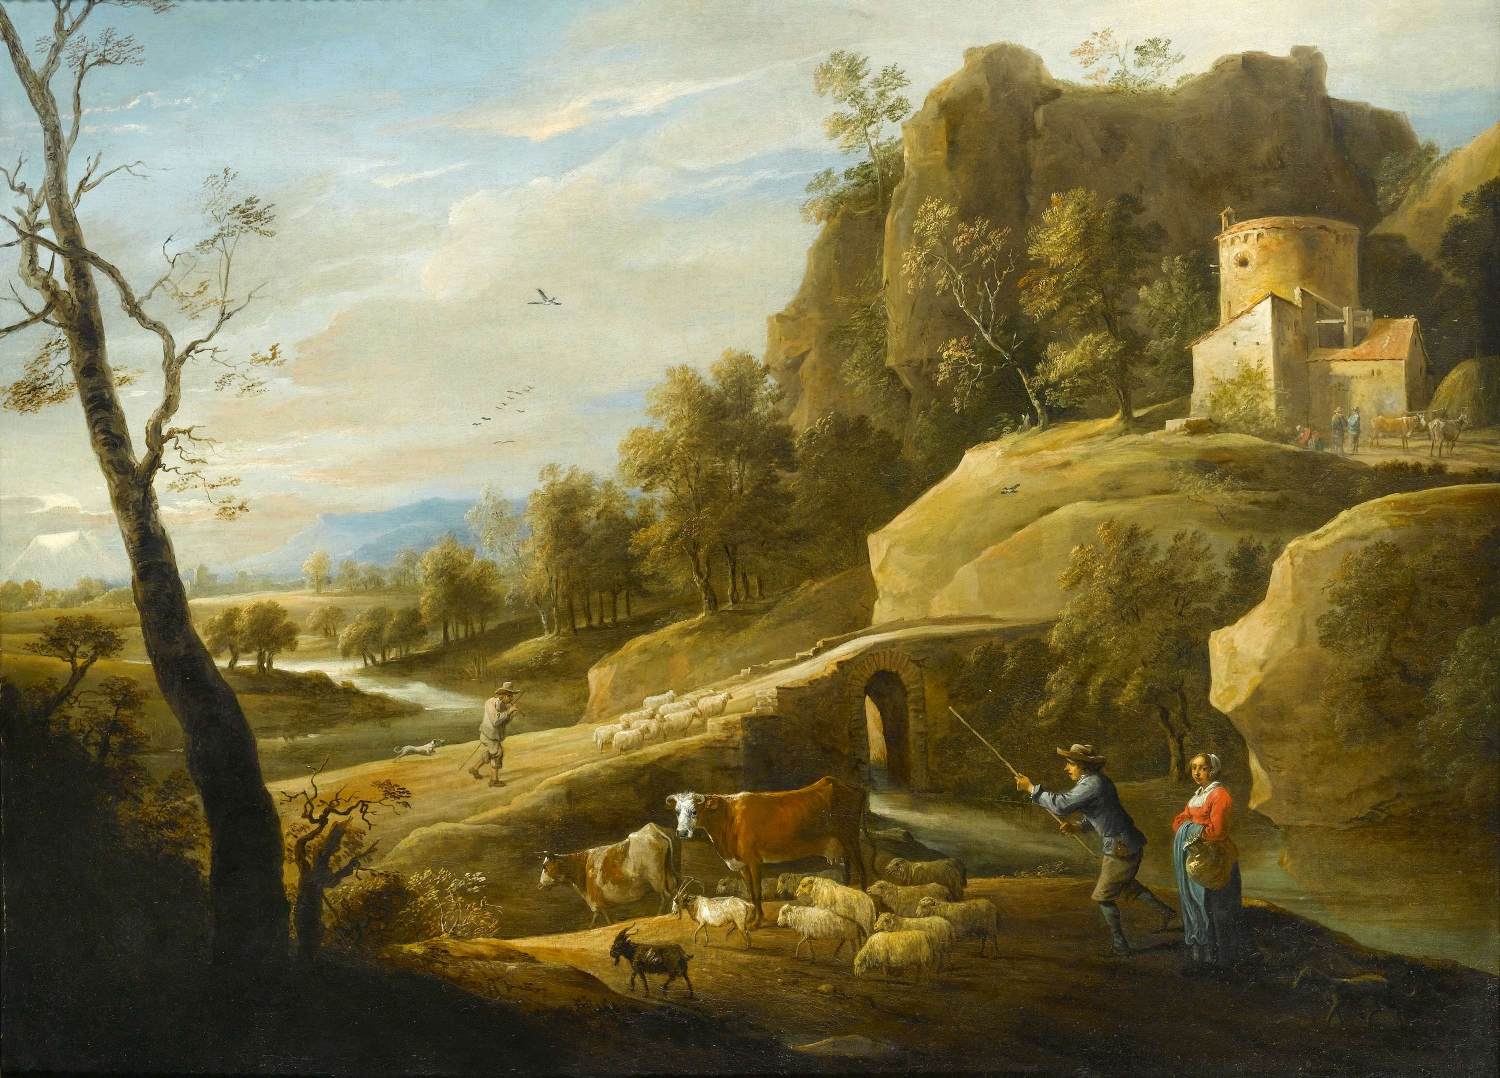 Landscape with a Shepherd and a Pasta